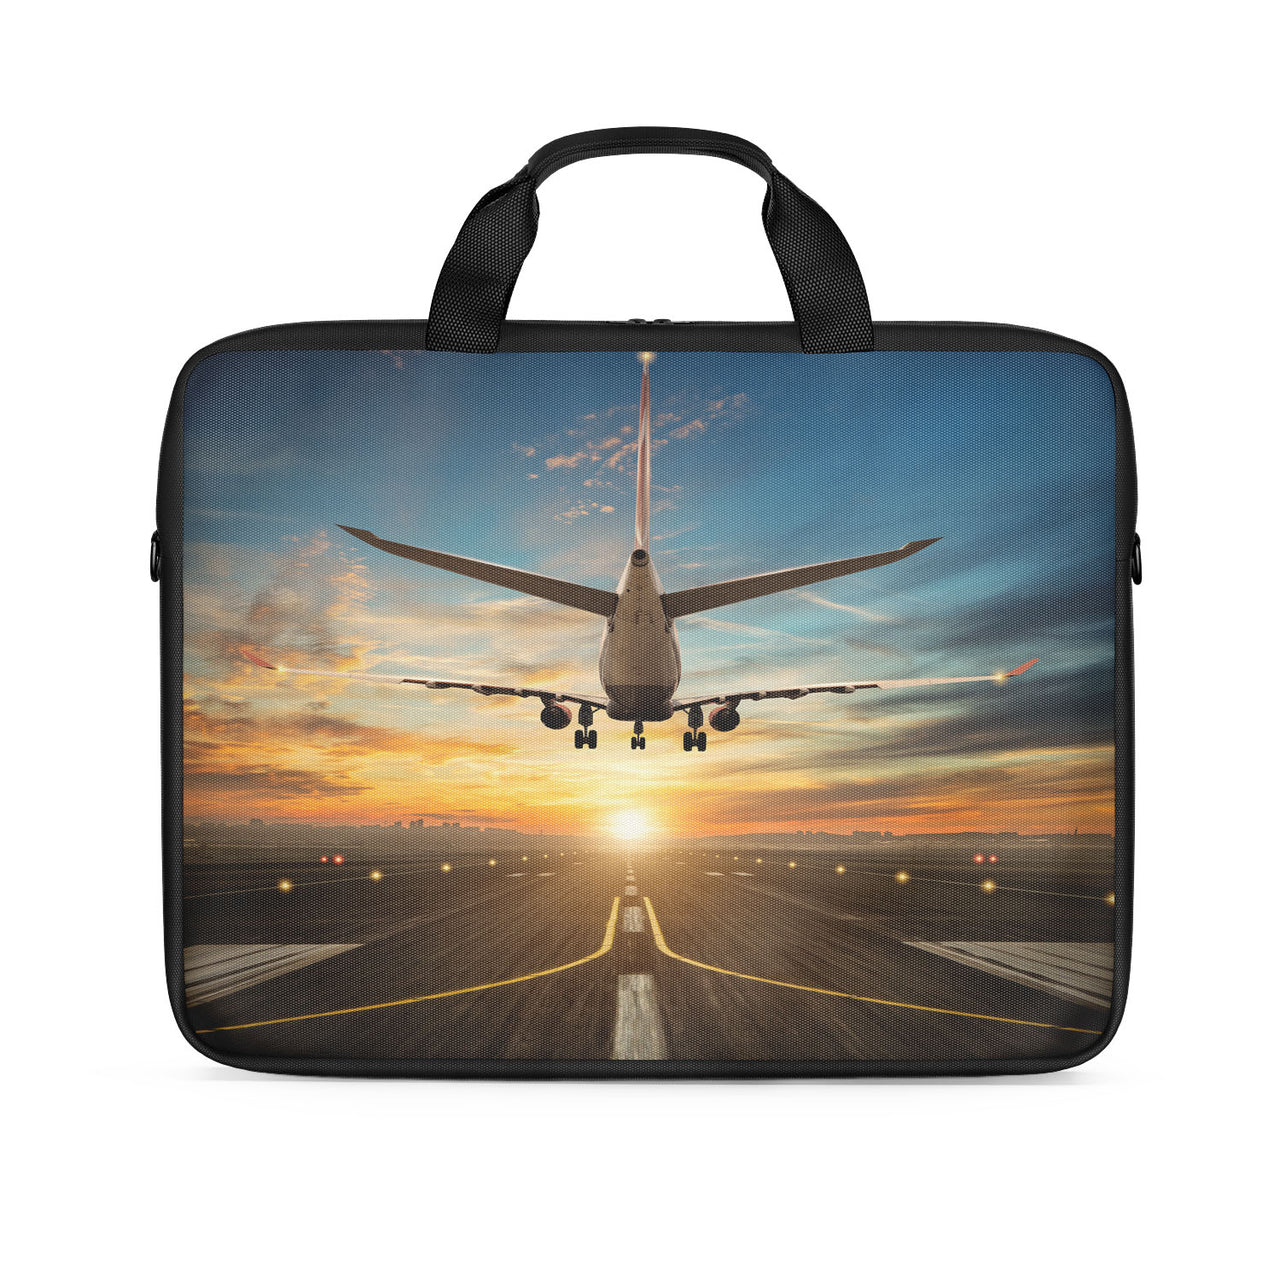 Airplane over Runway Towards the Sunrise Designed Laptop & Tablet Bags